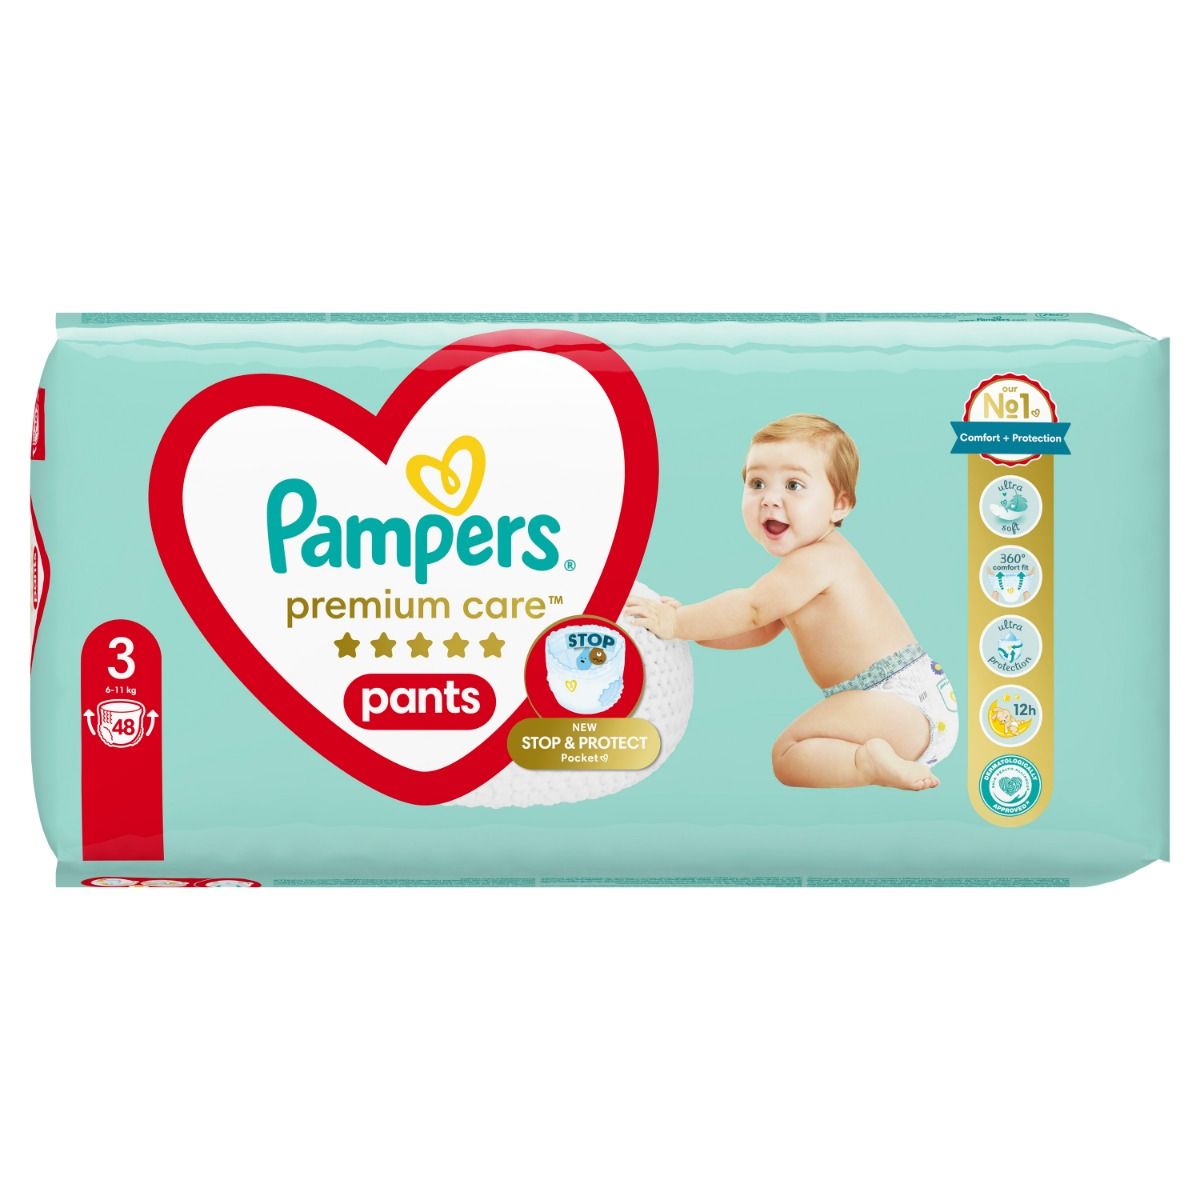 pampers 4 box ceneo